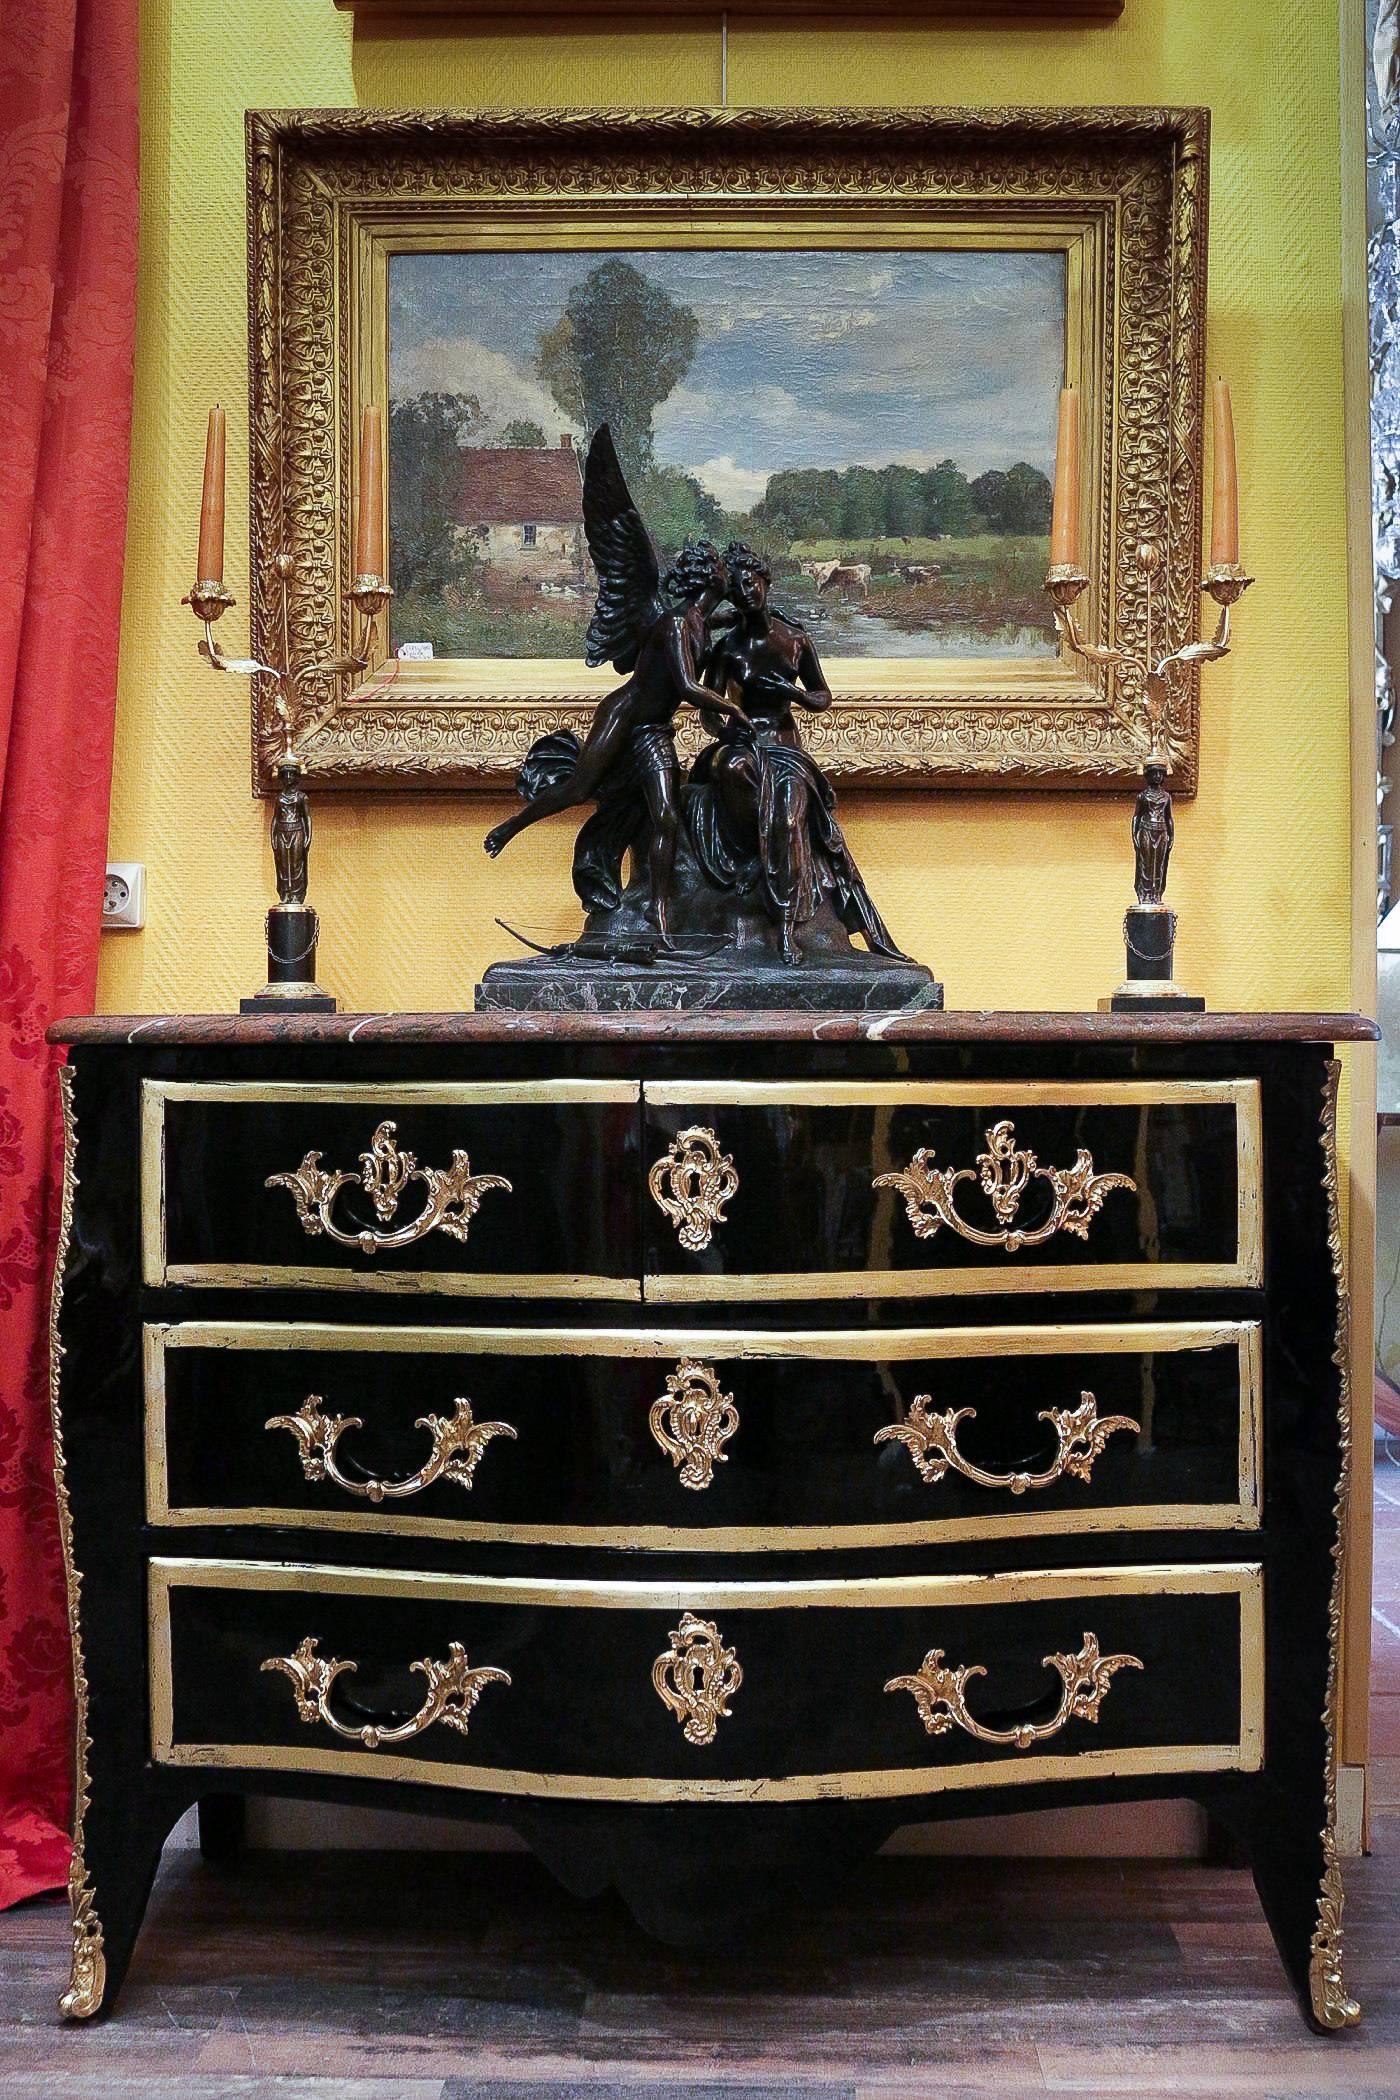 French Regence Period Serpentine Black Lacquered Commode Circa 1720.

A gorgeous and decorative, early-18h century, French Regence period (1723-1730) fruitwood veneer black lacquered serpentine commode, opening by four drawers with original